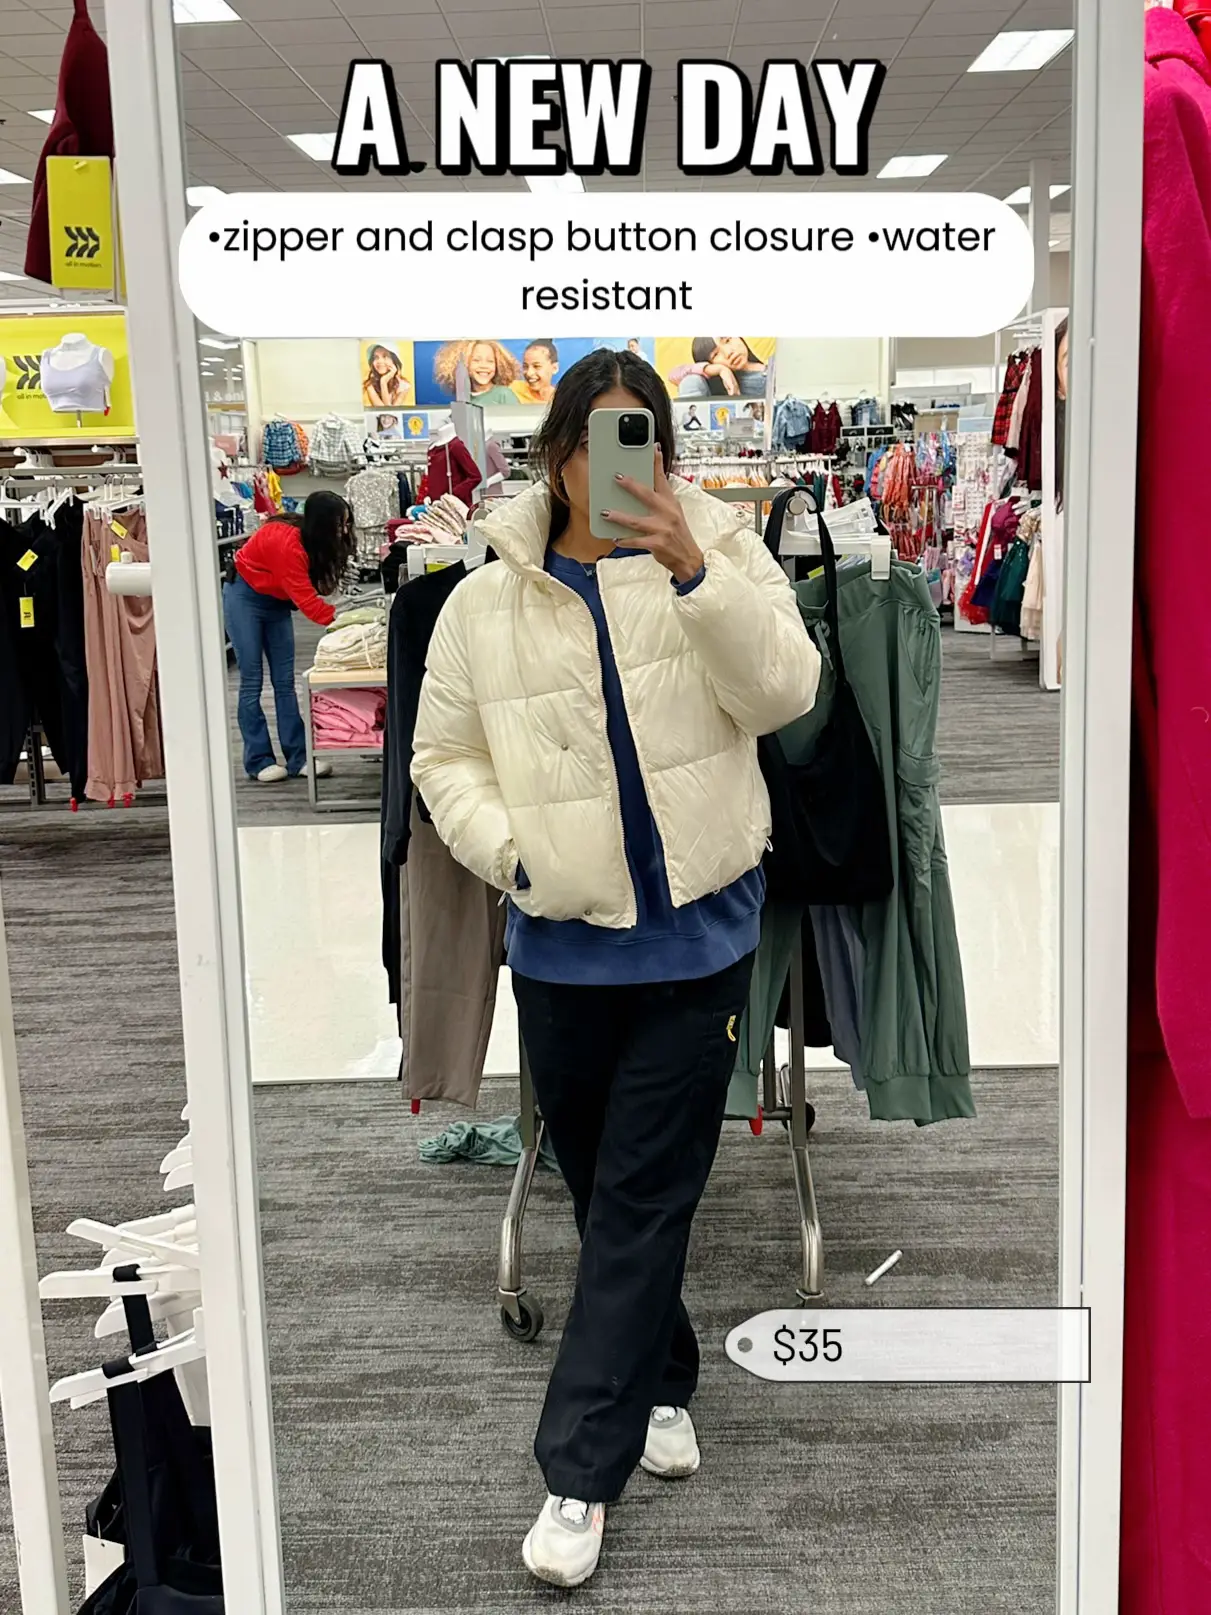  A woman in a brown jacket and grey pants is taking a selfie in a store.